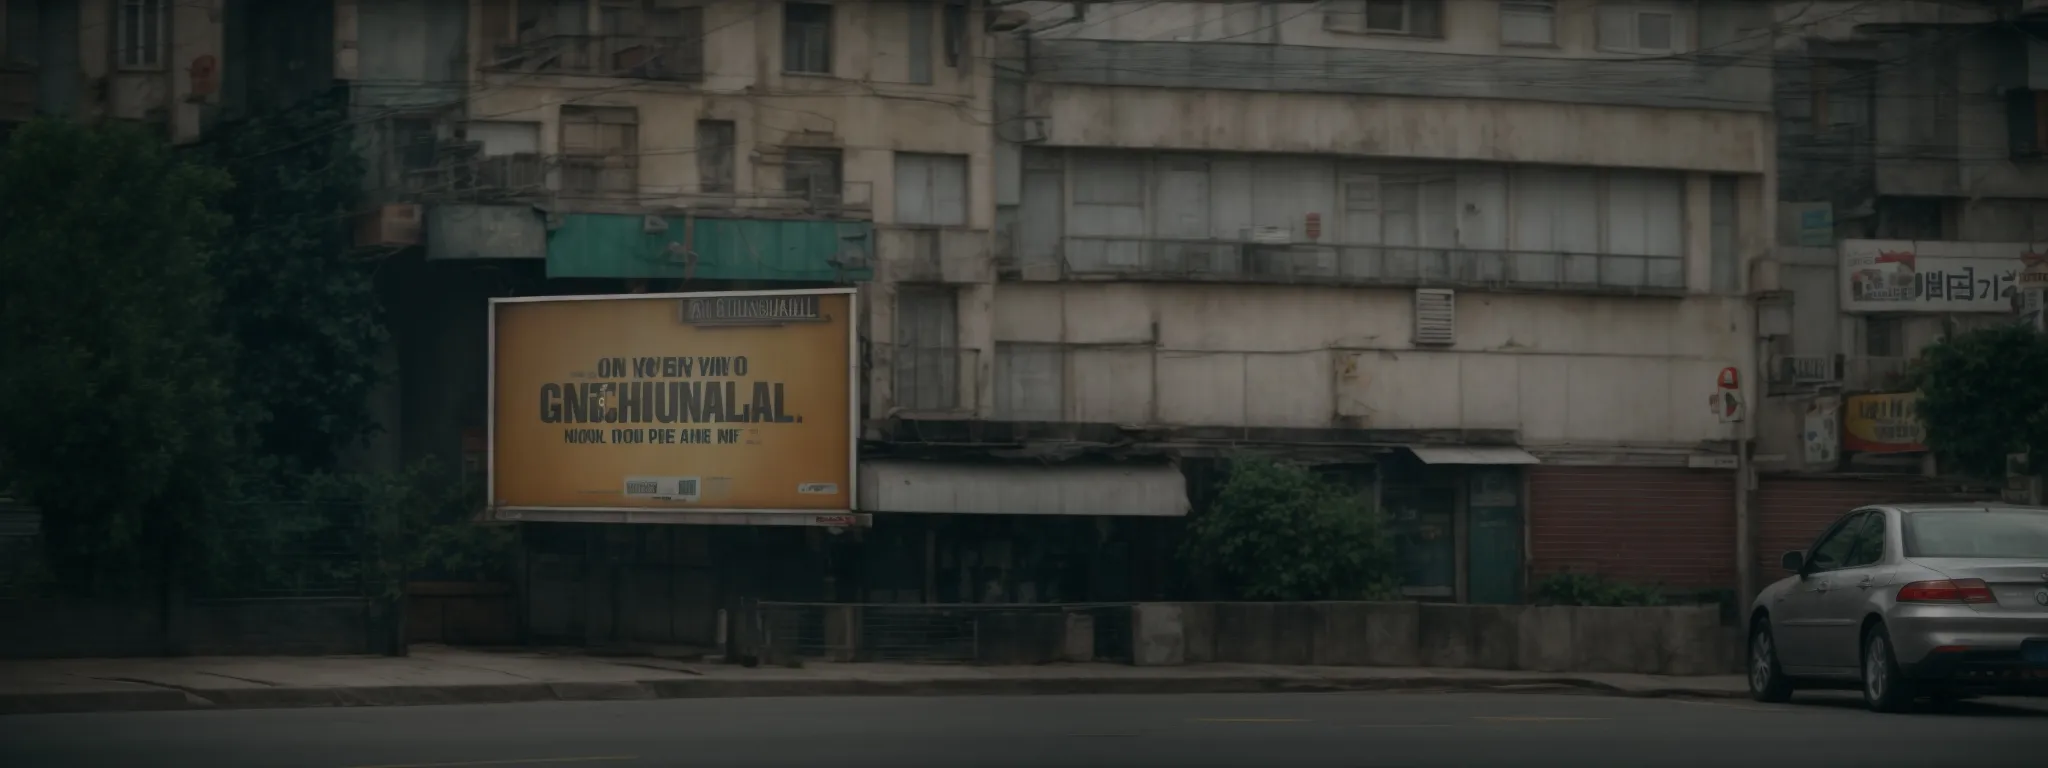 a mundane-looking billboard overlooking an empty street, signifying outdated advertising.